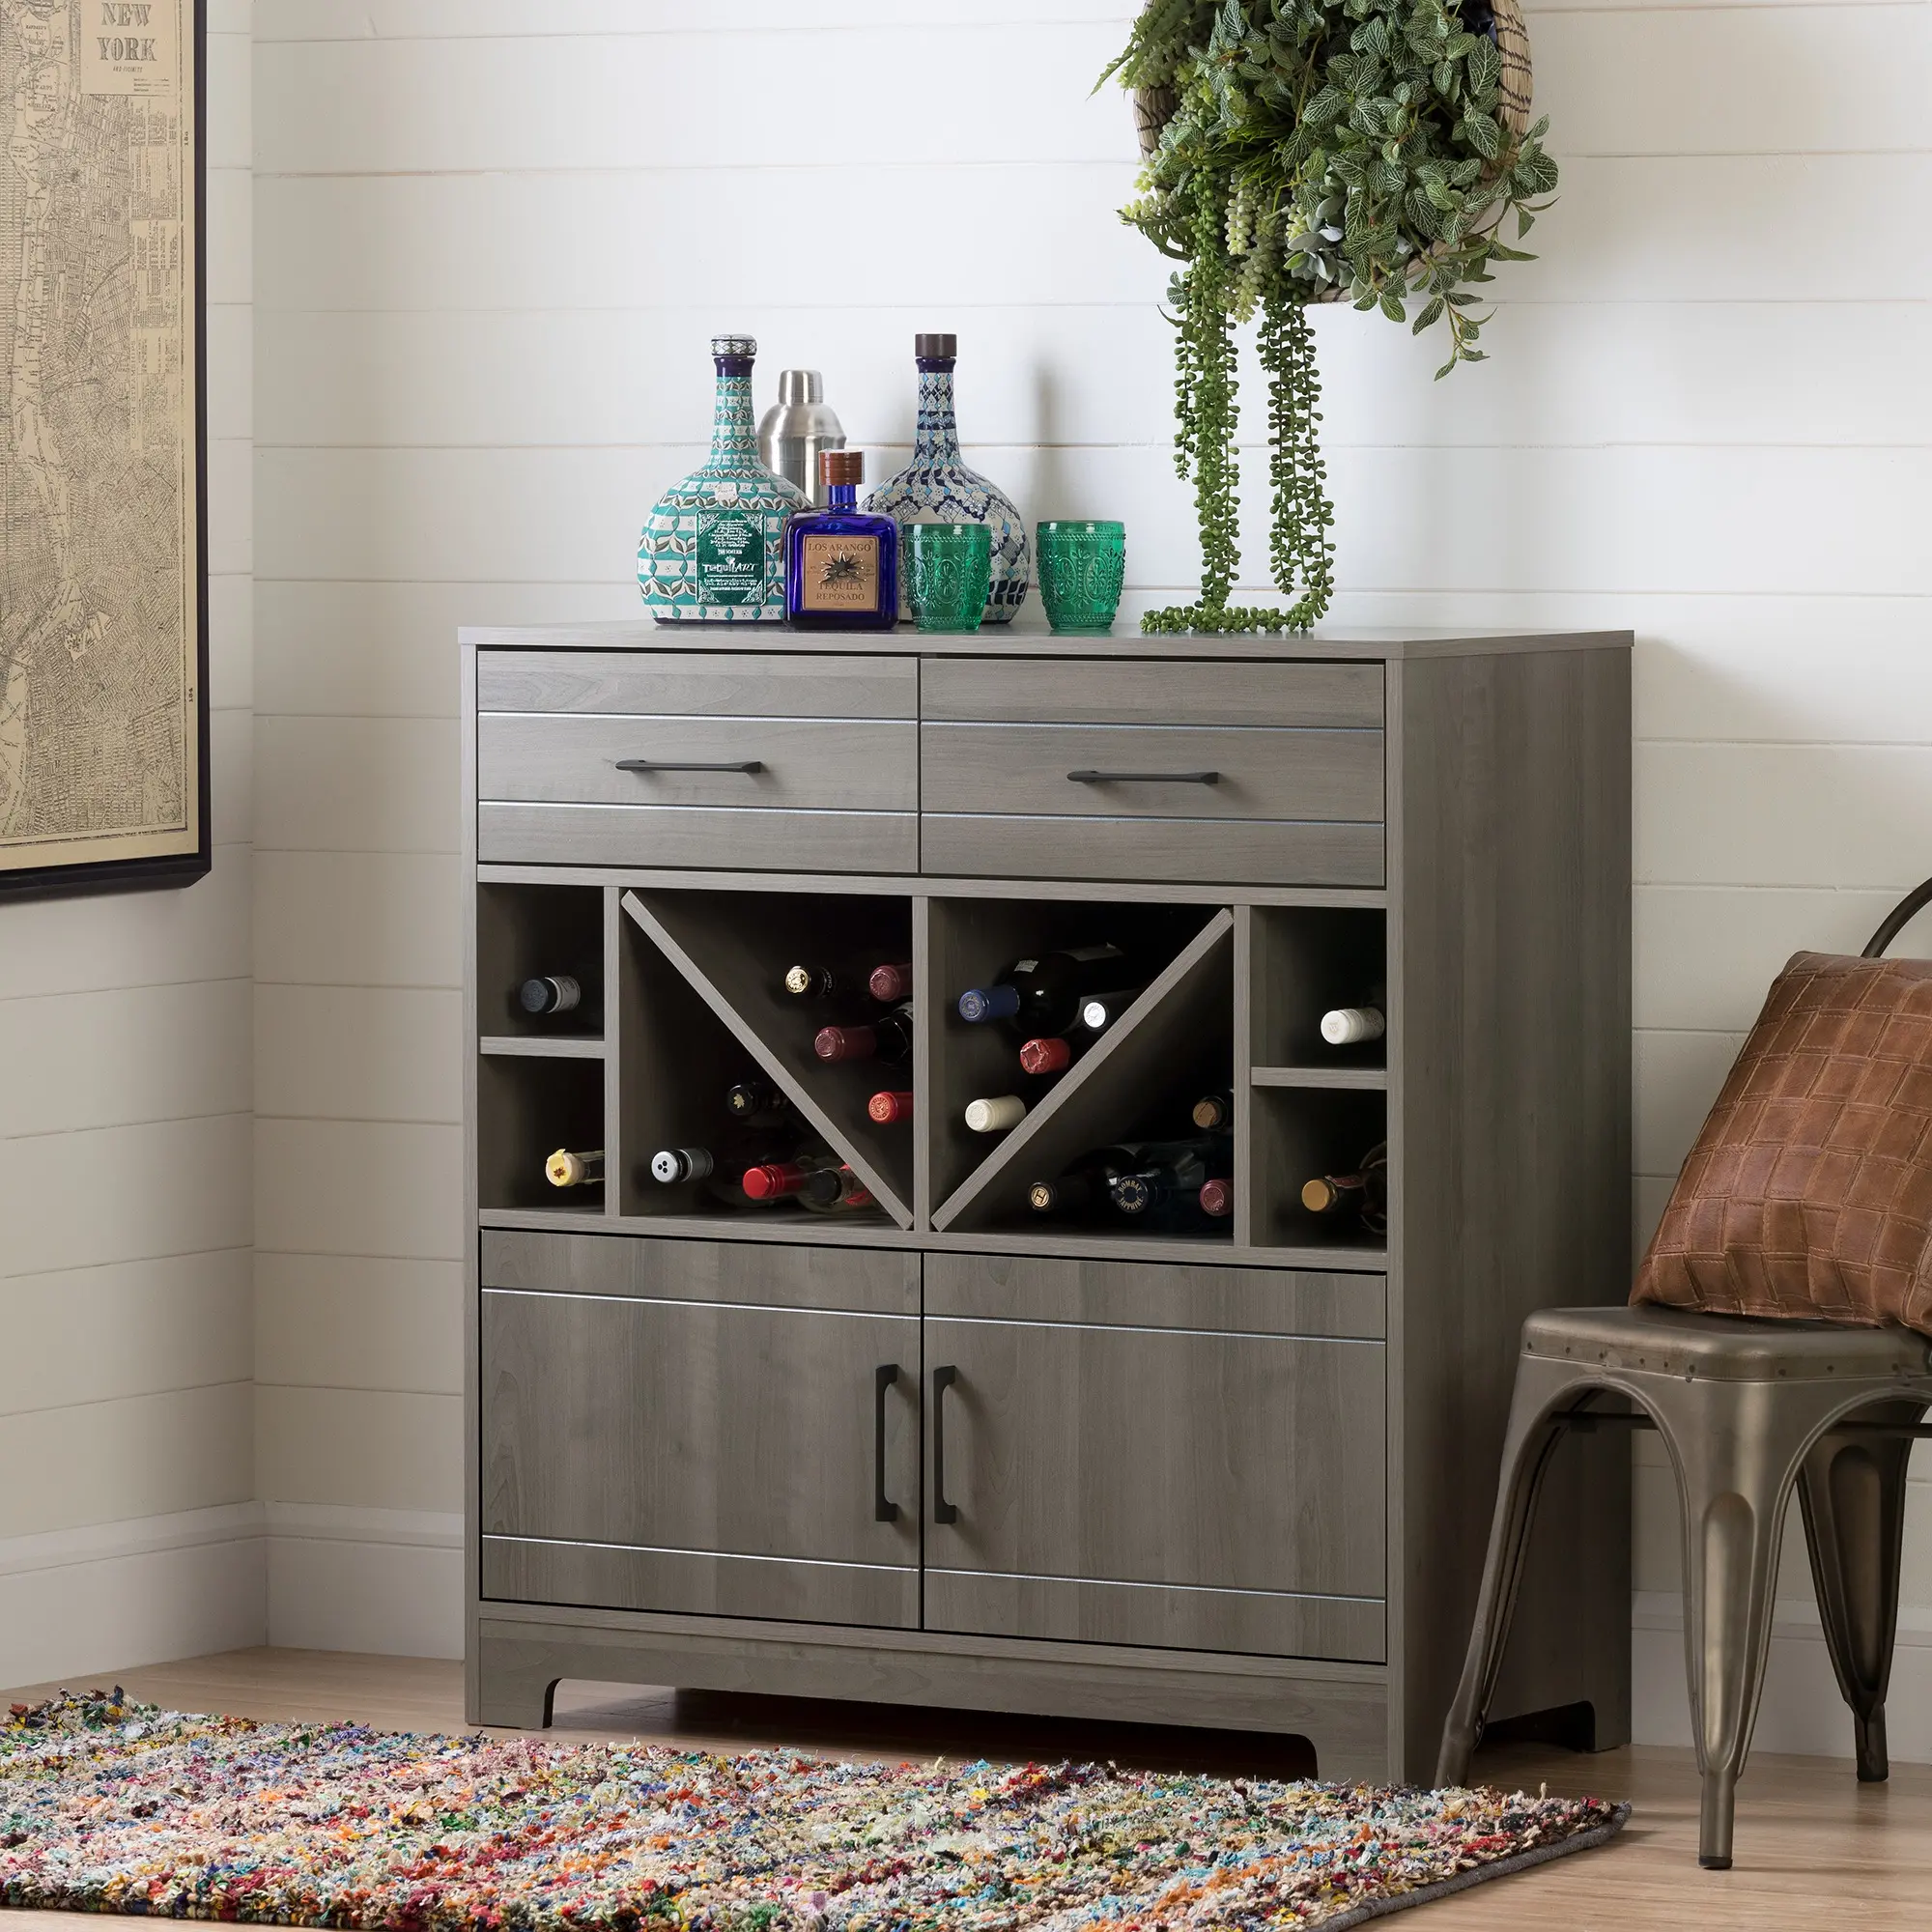 Vietti Bar Cabinet with Bottle Storage and Drawers - South Shore